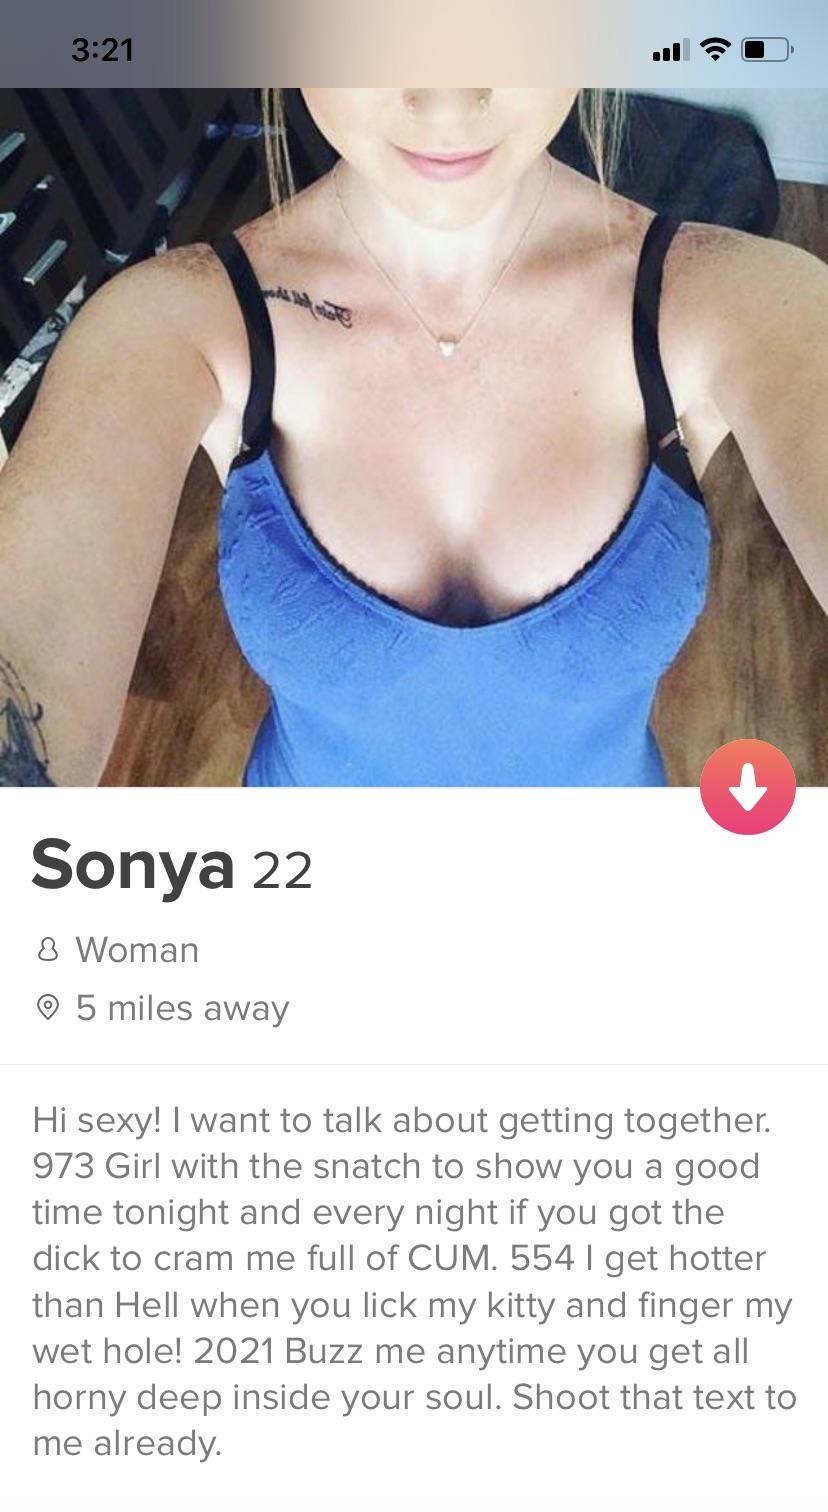 shoulder - Sonya 22 8 Woman 5 miles away Hi sexy! I want to talk about getting together. 973 Girl with the snatch to show you a good time tonight and every night if you got the dick to cram me full of Cum. 554 I get hotter than Hell when you lick my kitty